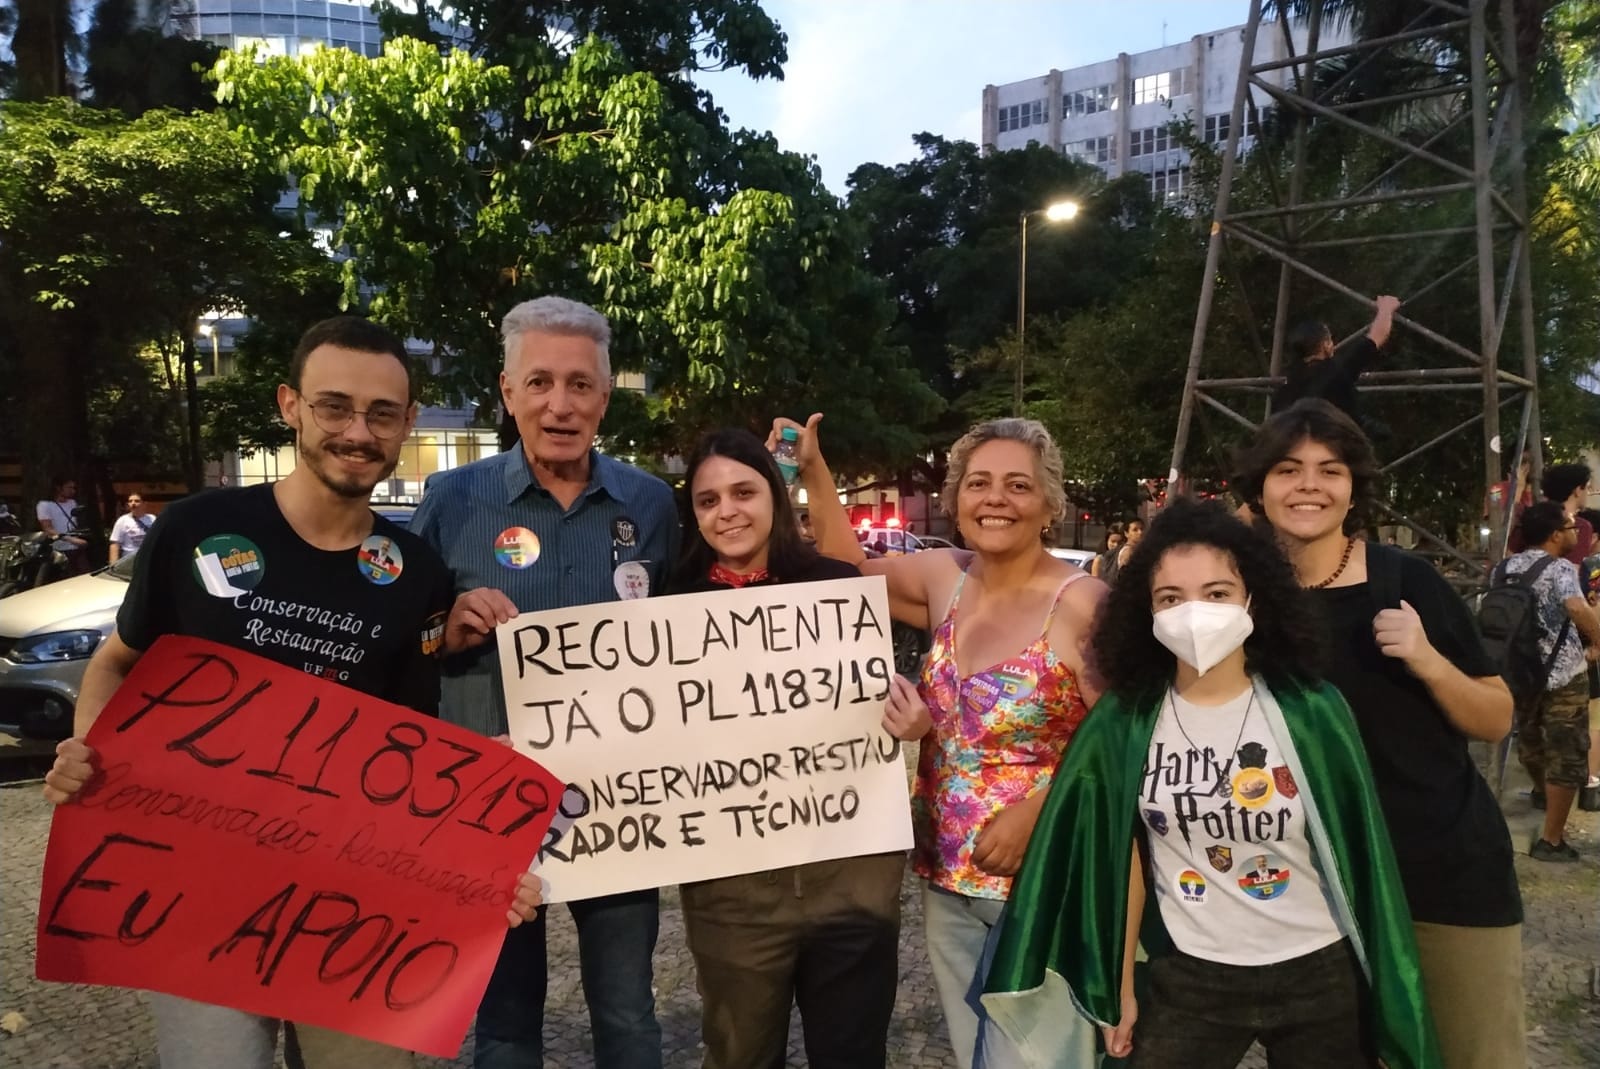 Federal University of Minas Gerais (UFMG) students with Congressman Rogério Correia (pictured second from the left), member of CTASP and 1.183/2019 Bill supporter.